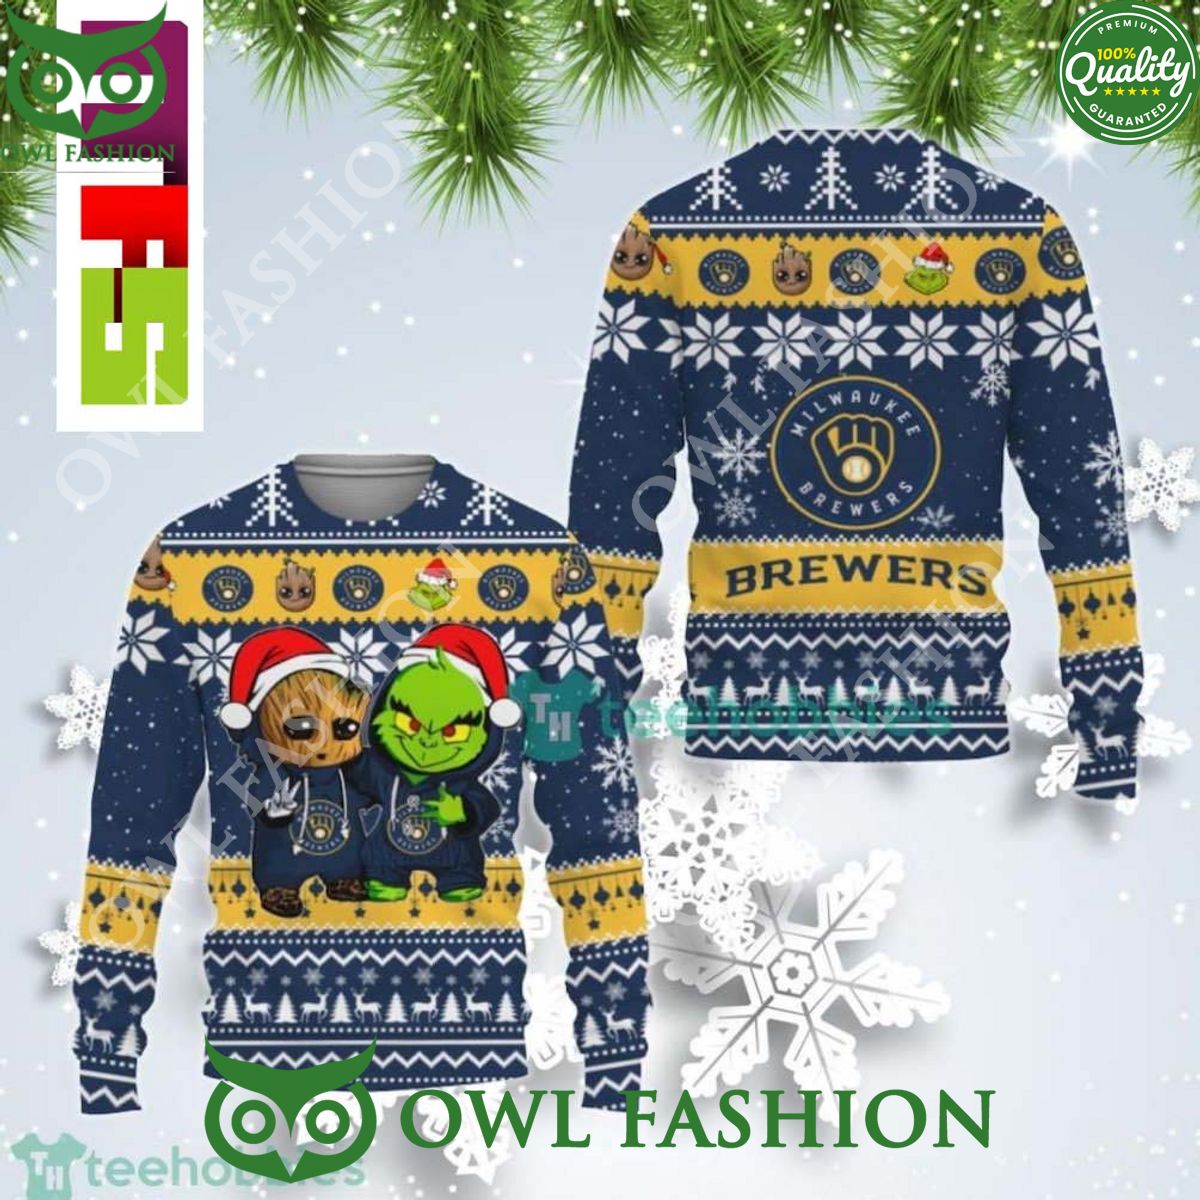 mlb milwaukee brewers baby groot and grinch best friends ugly christmas sweater 2023 1 uewiv.jpg